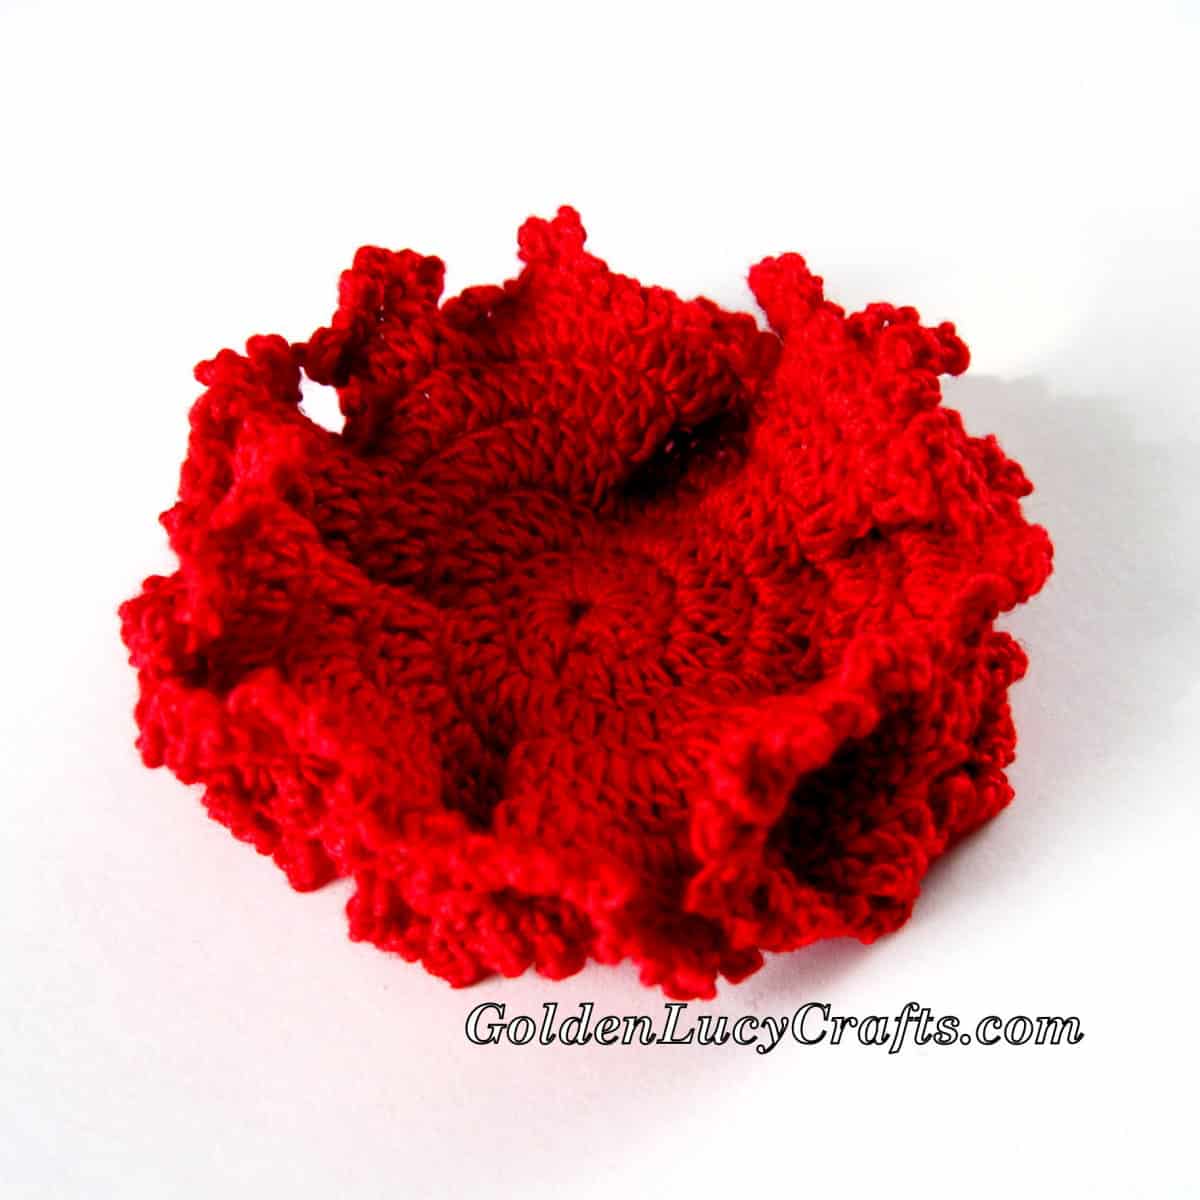 Crochet hyperbolic coral in red color.